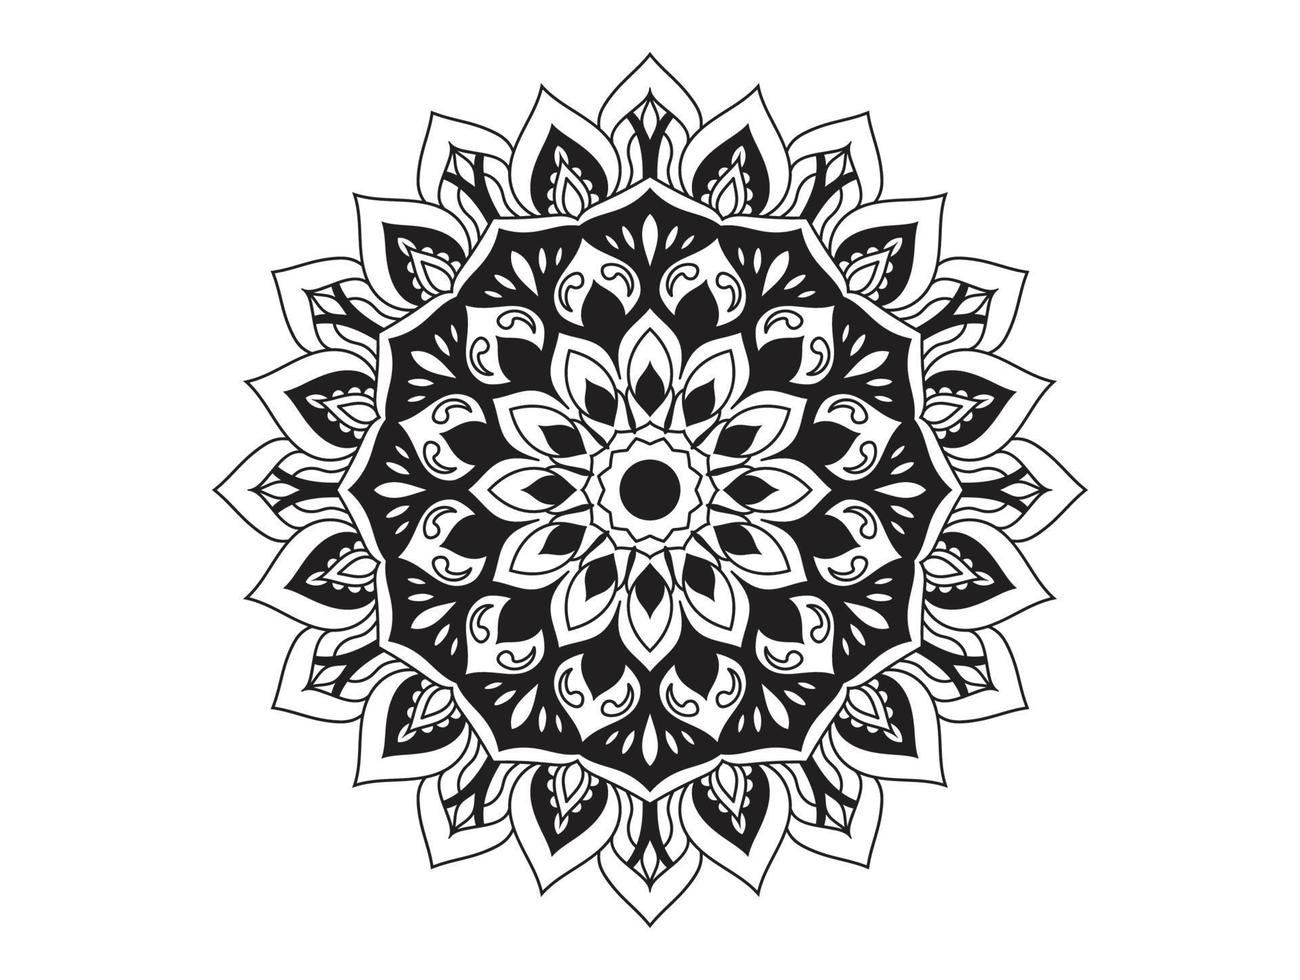 Circle pattern in the form of mandala for Henna, Mehndi, tattoos, decorative ornaments in ethnic oriental style, coloring book pages. vector